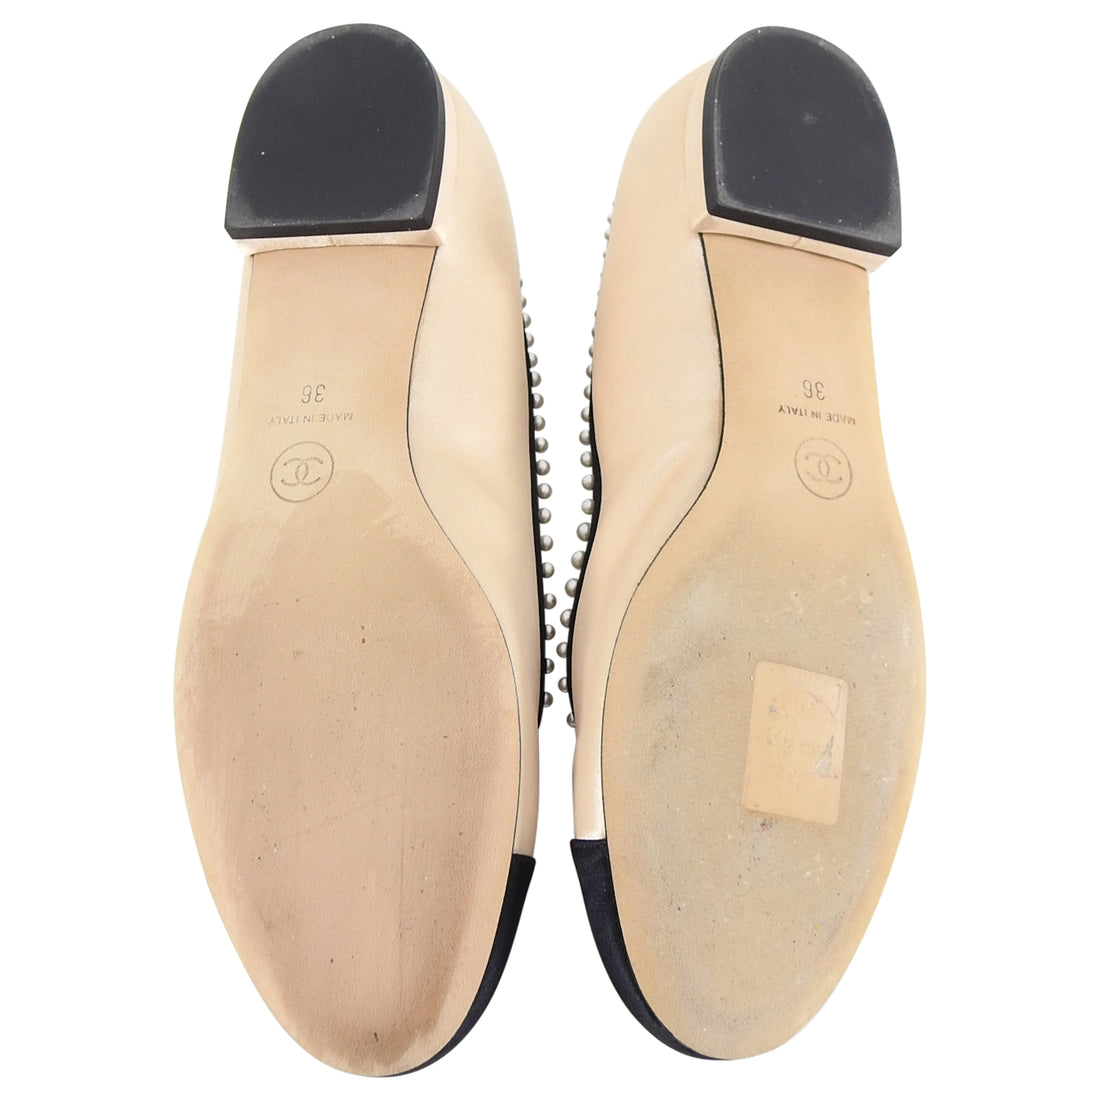 Chanel Beige and Black Satin Ballet Flats with Pearls and CC - 36